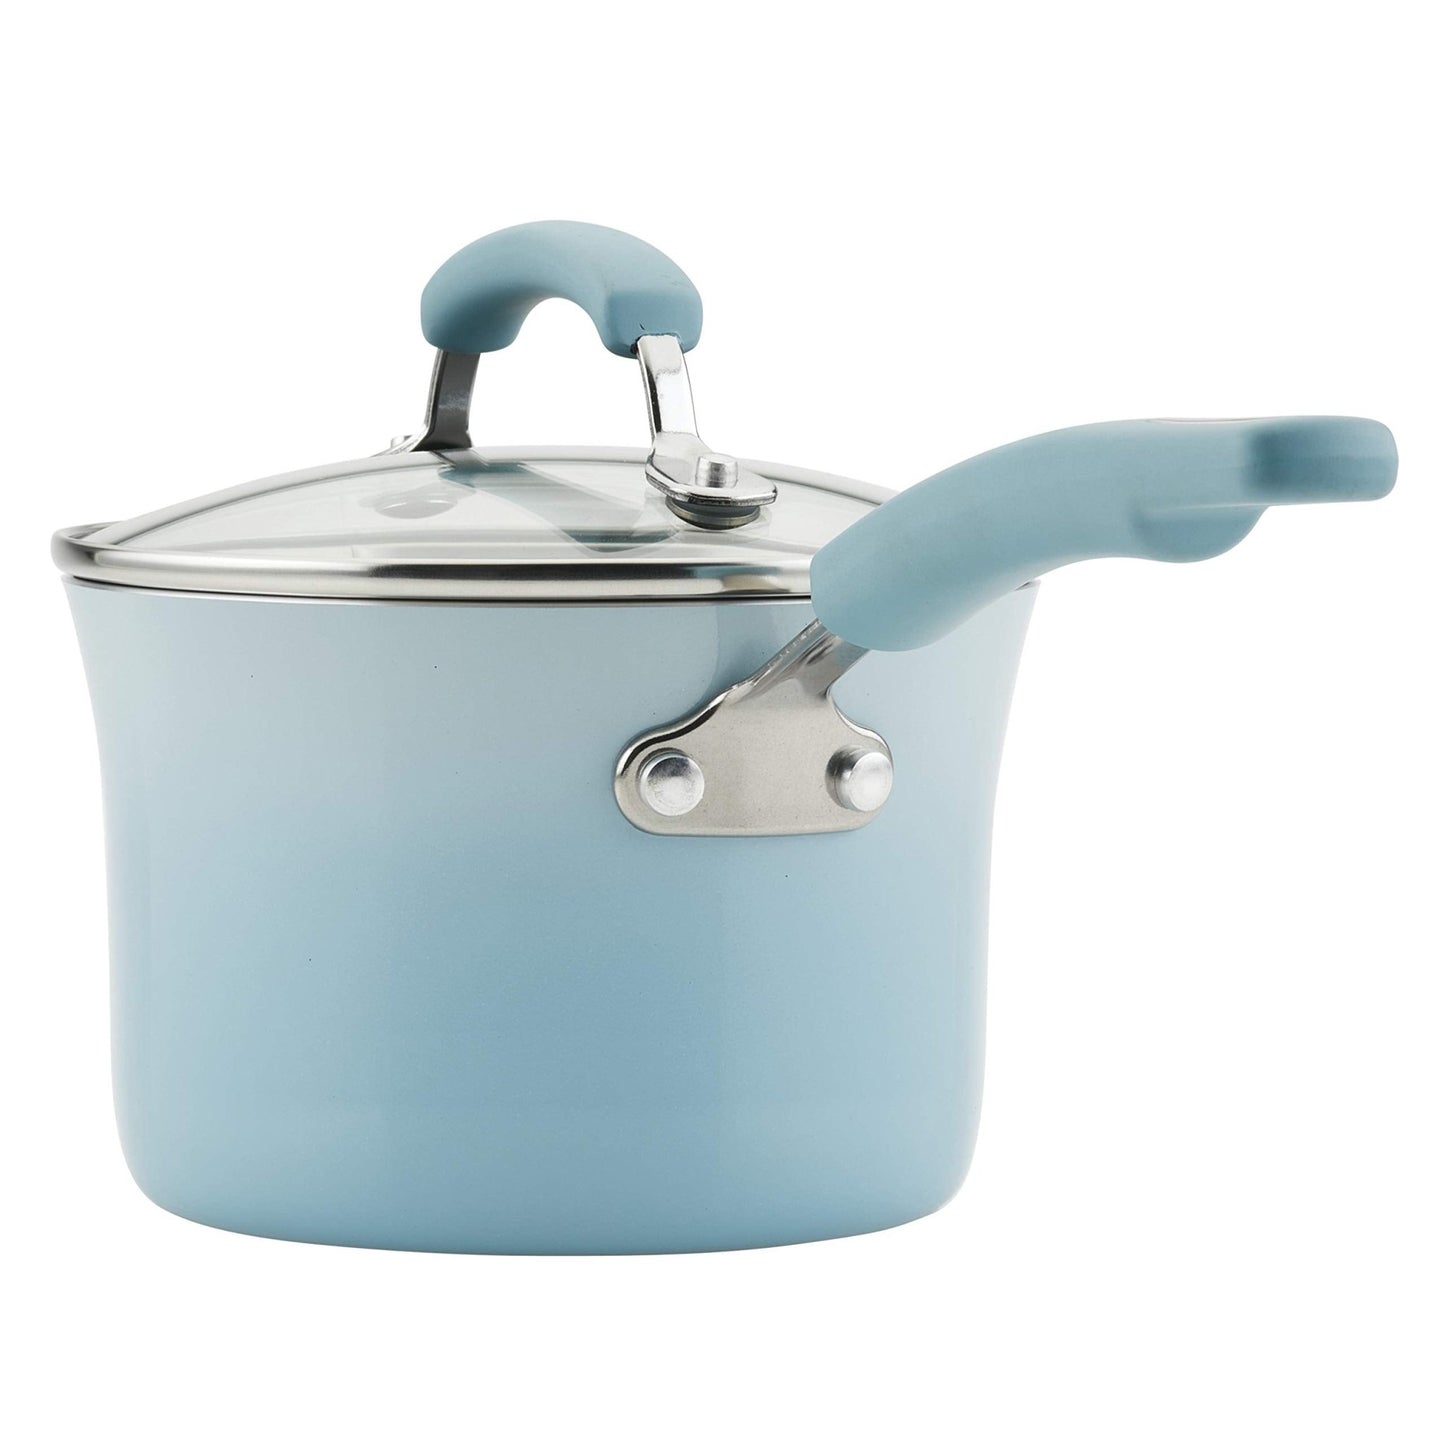 Rachael Ray-Rachael Ray Brights Nonstick Cookware Pots and Pans Set with LocknLock Containers, 19 Piece, Sky Blue - Brandat Outlet